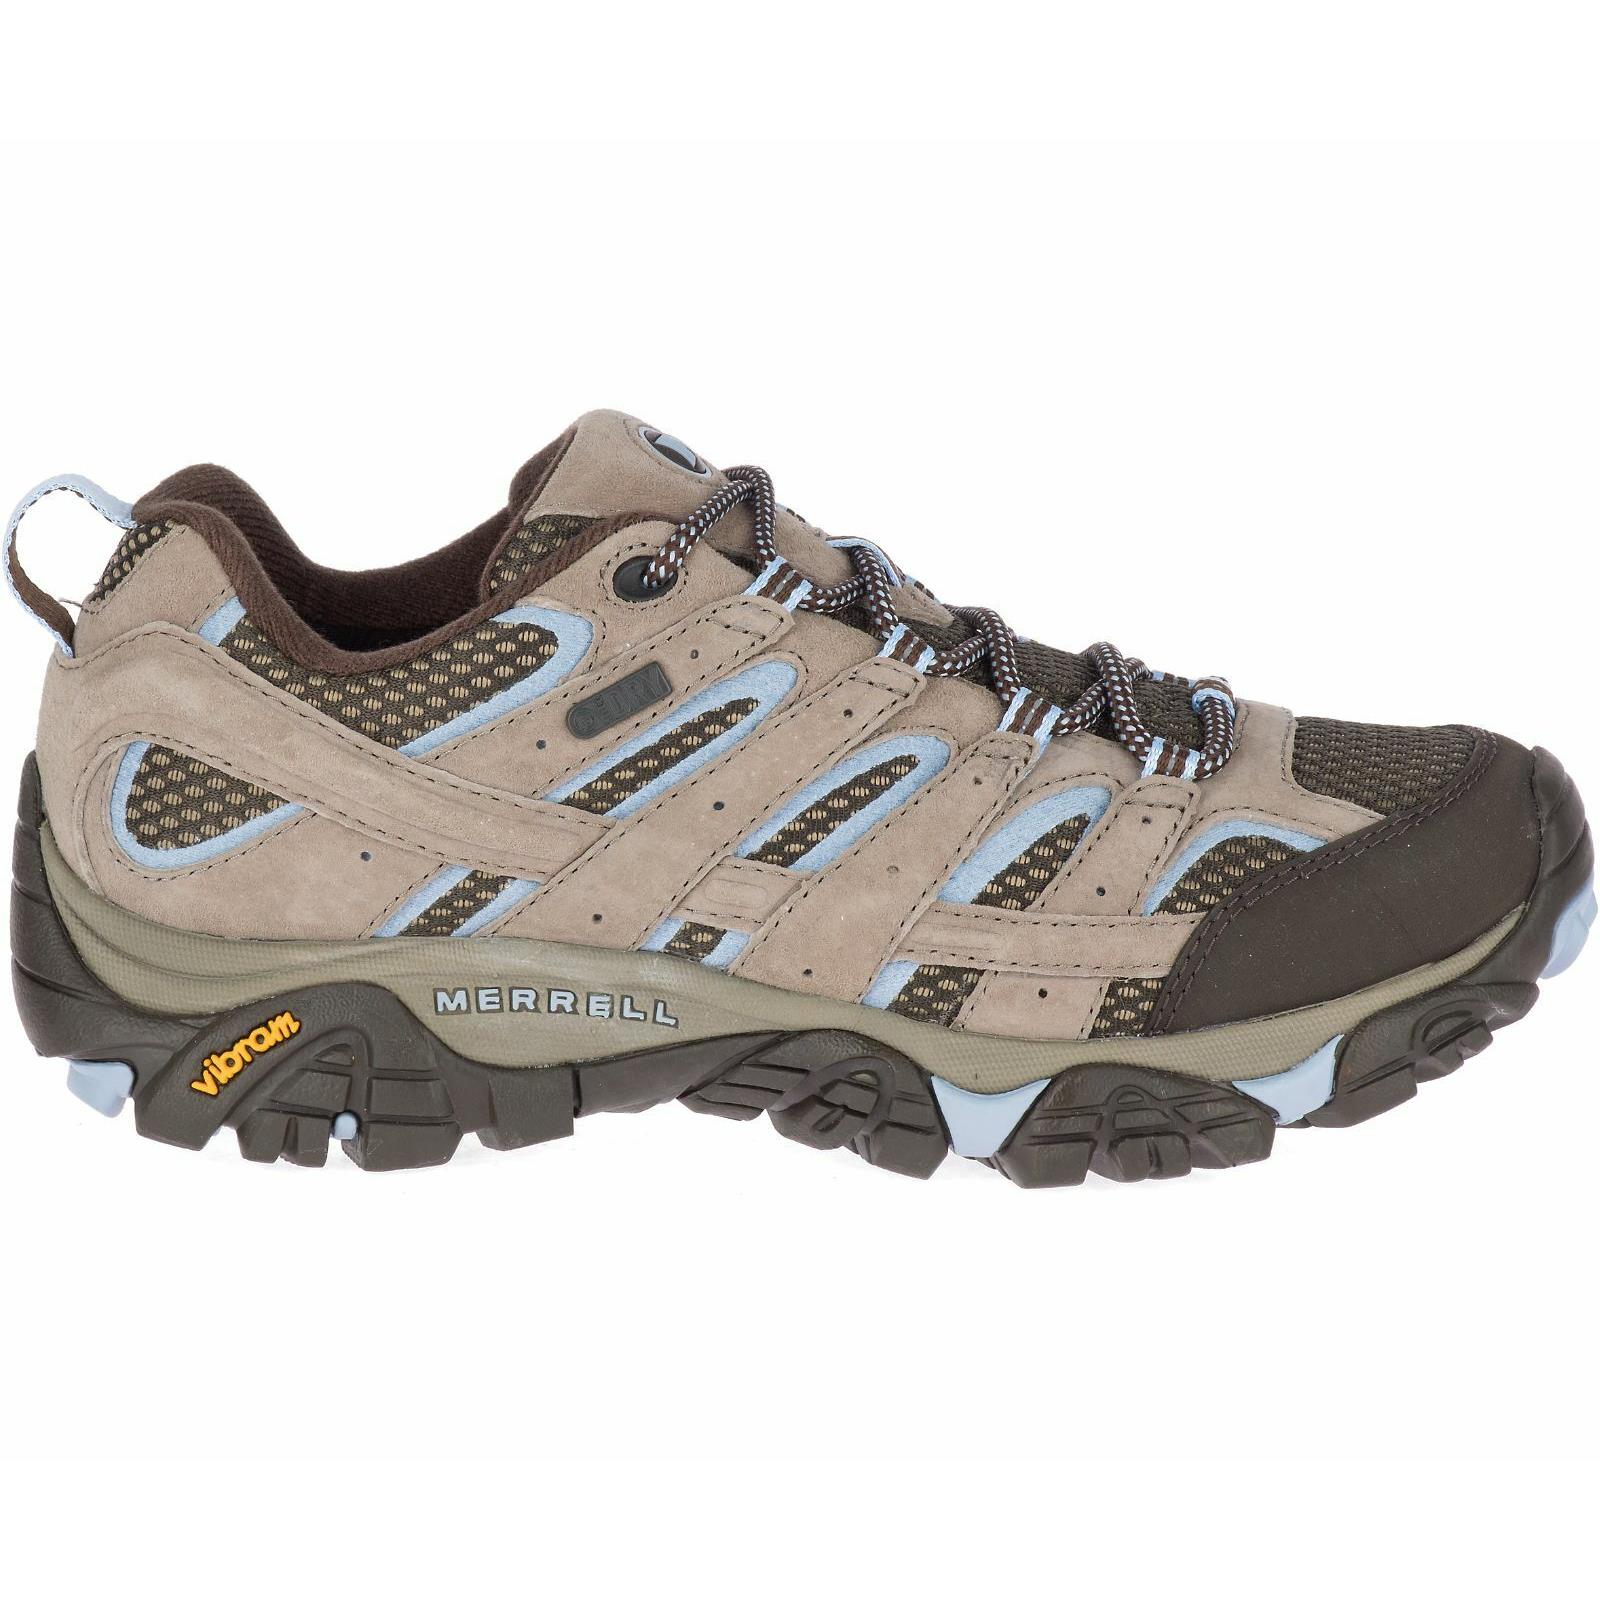 Merrell Women`s Waterproof Moisture Wicking Antimicrobial Arch Support Shoe Boot Brindle